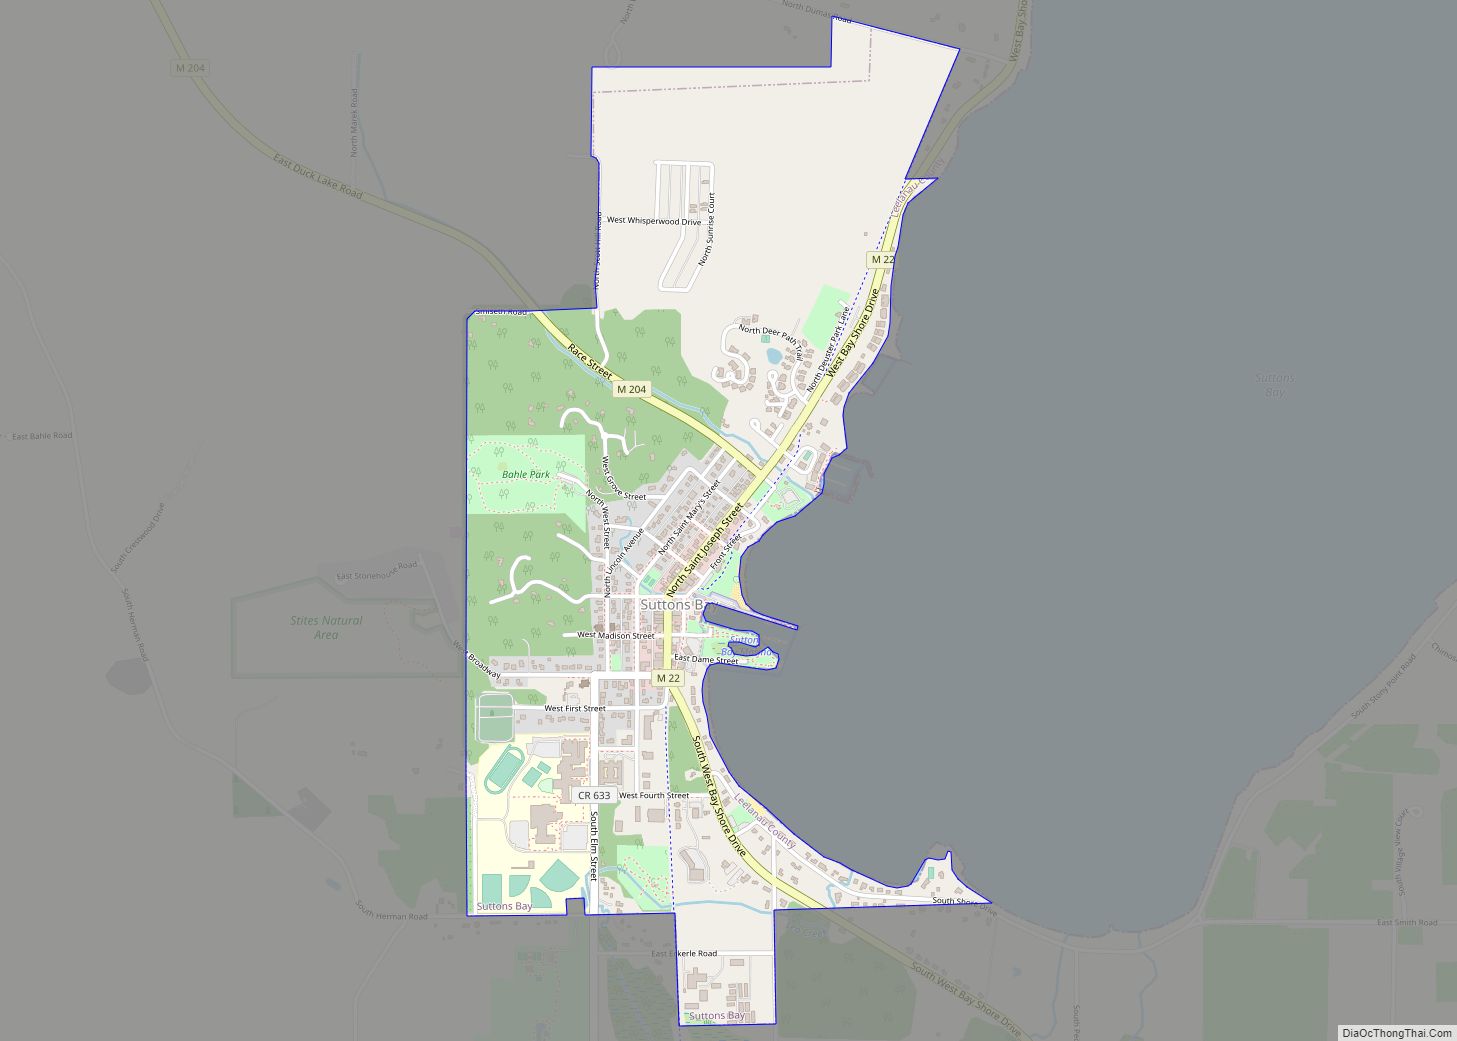 Map of Suttons Bay village